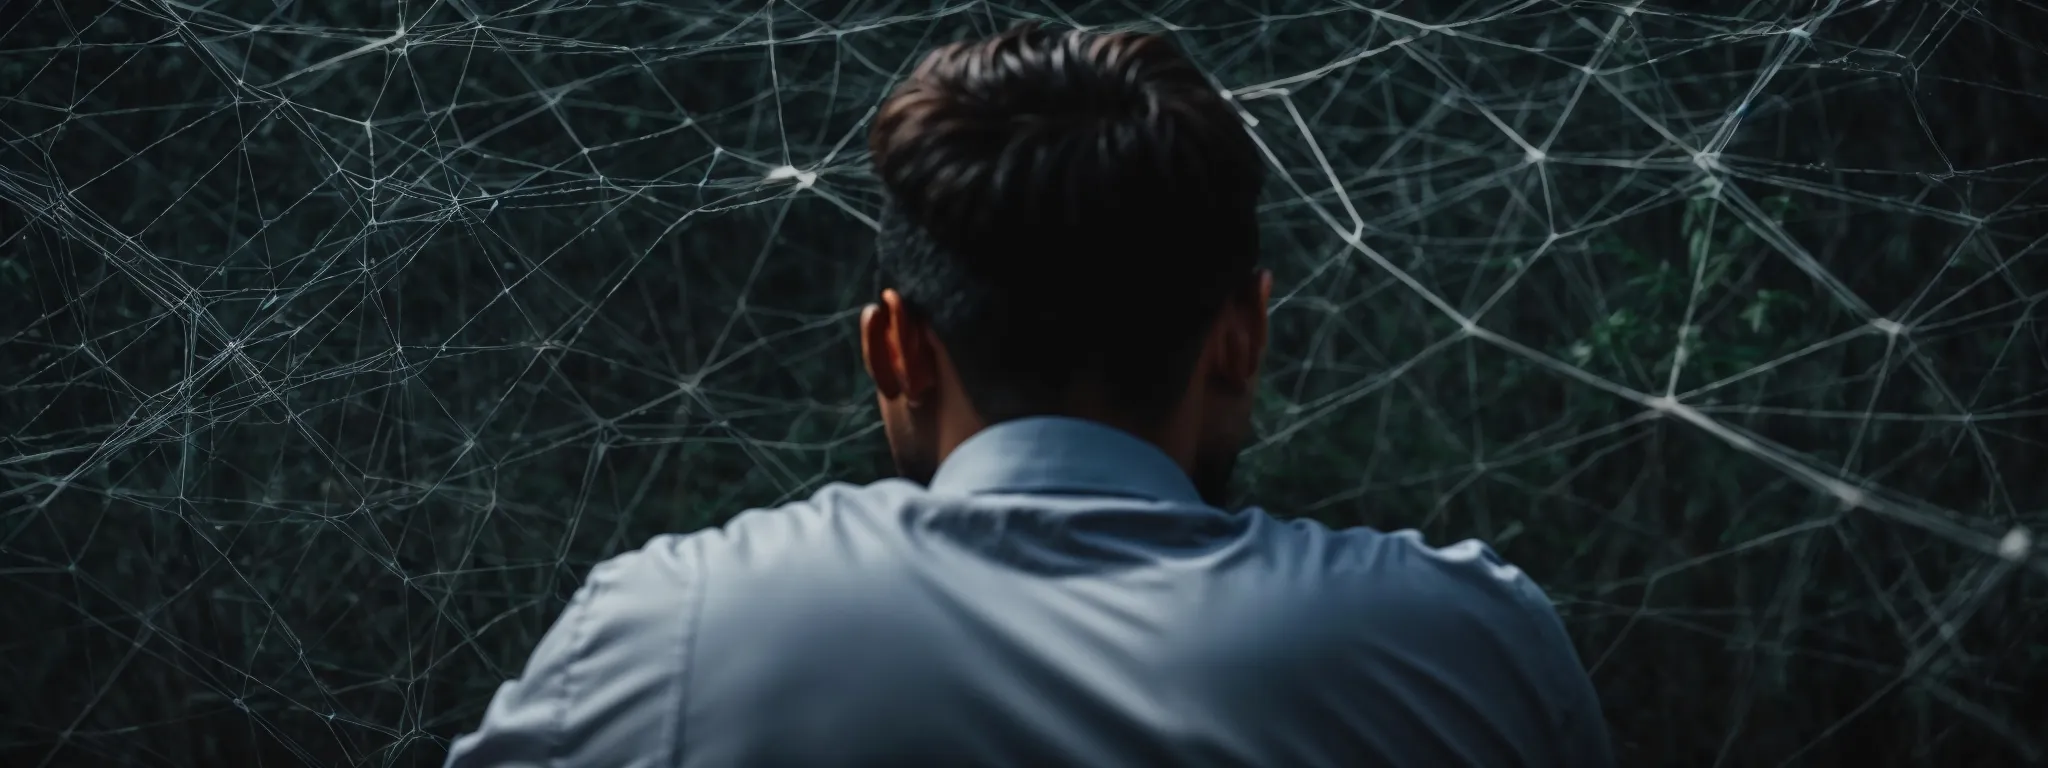 a person deeply focused on a computer screen, reviewing a complex web of interconnected nodes representing the challenge of ethical link-building in seo.